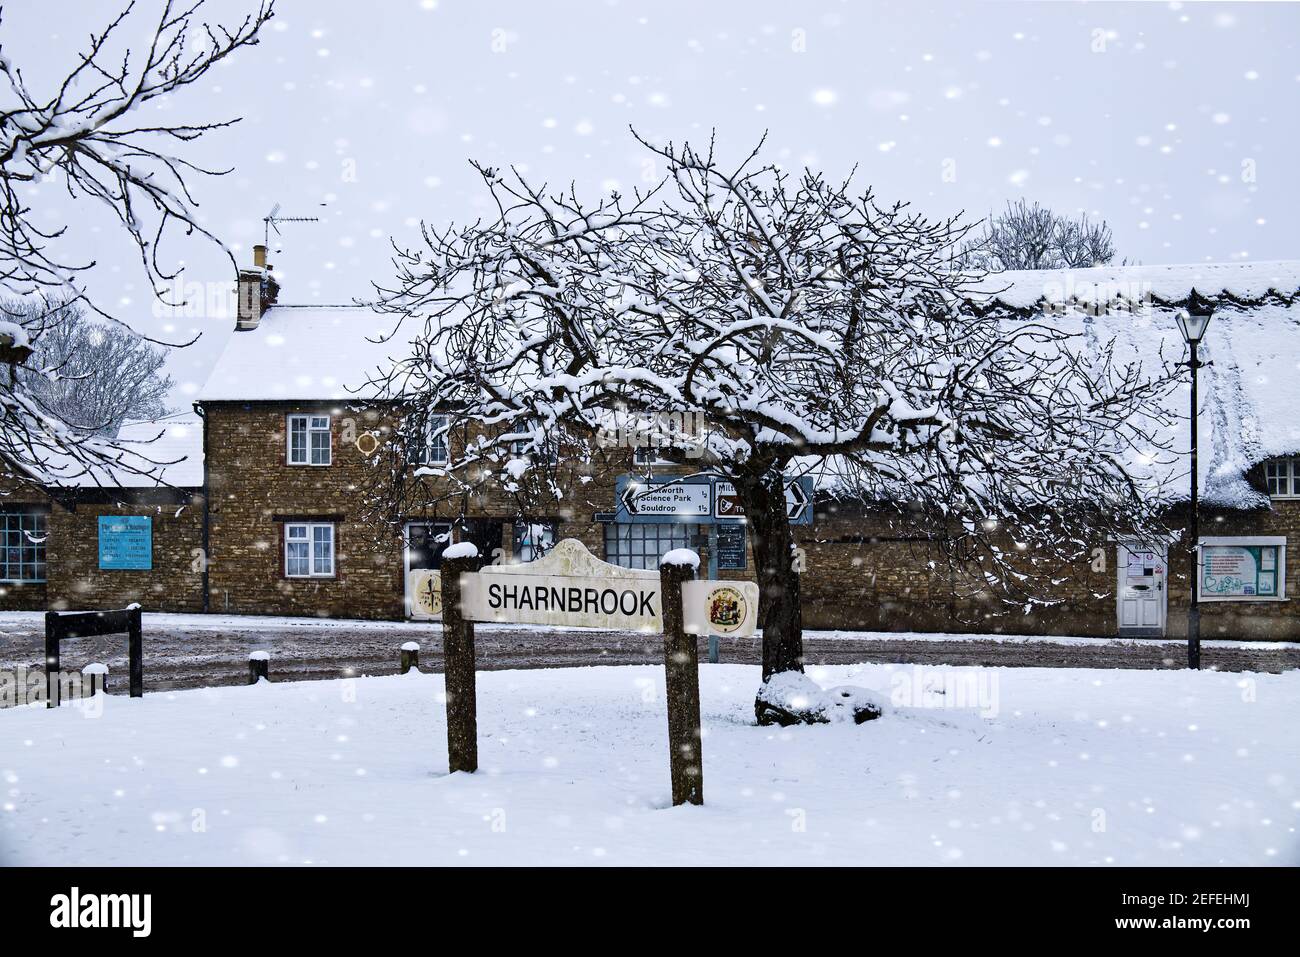 Sharnbrook village green during snow storm, Bedfordshire, England, UK Stock Photo